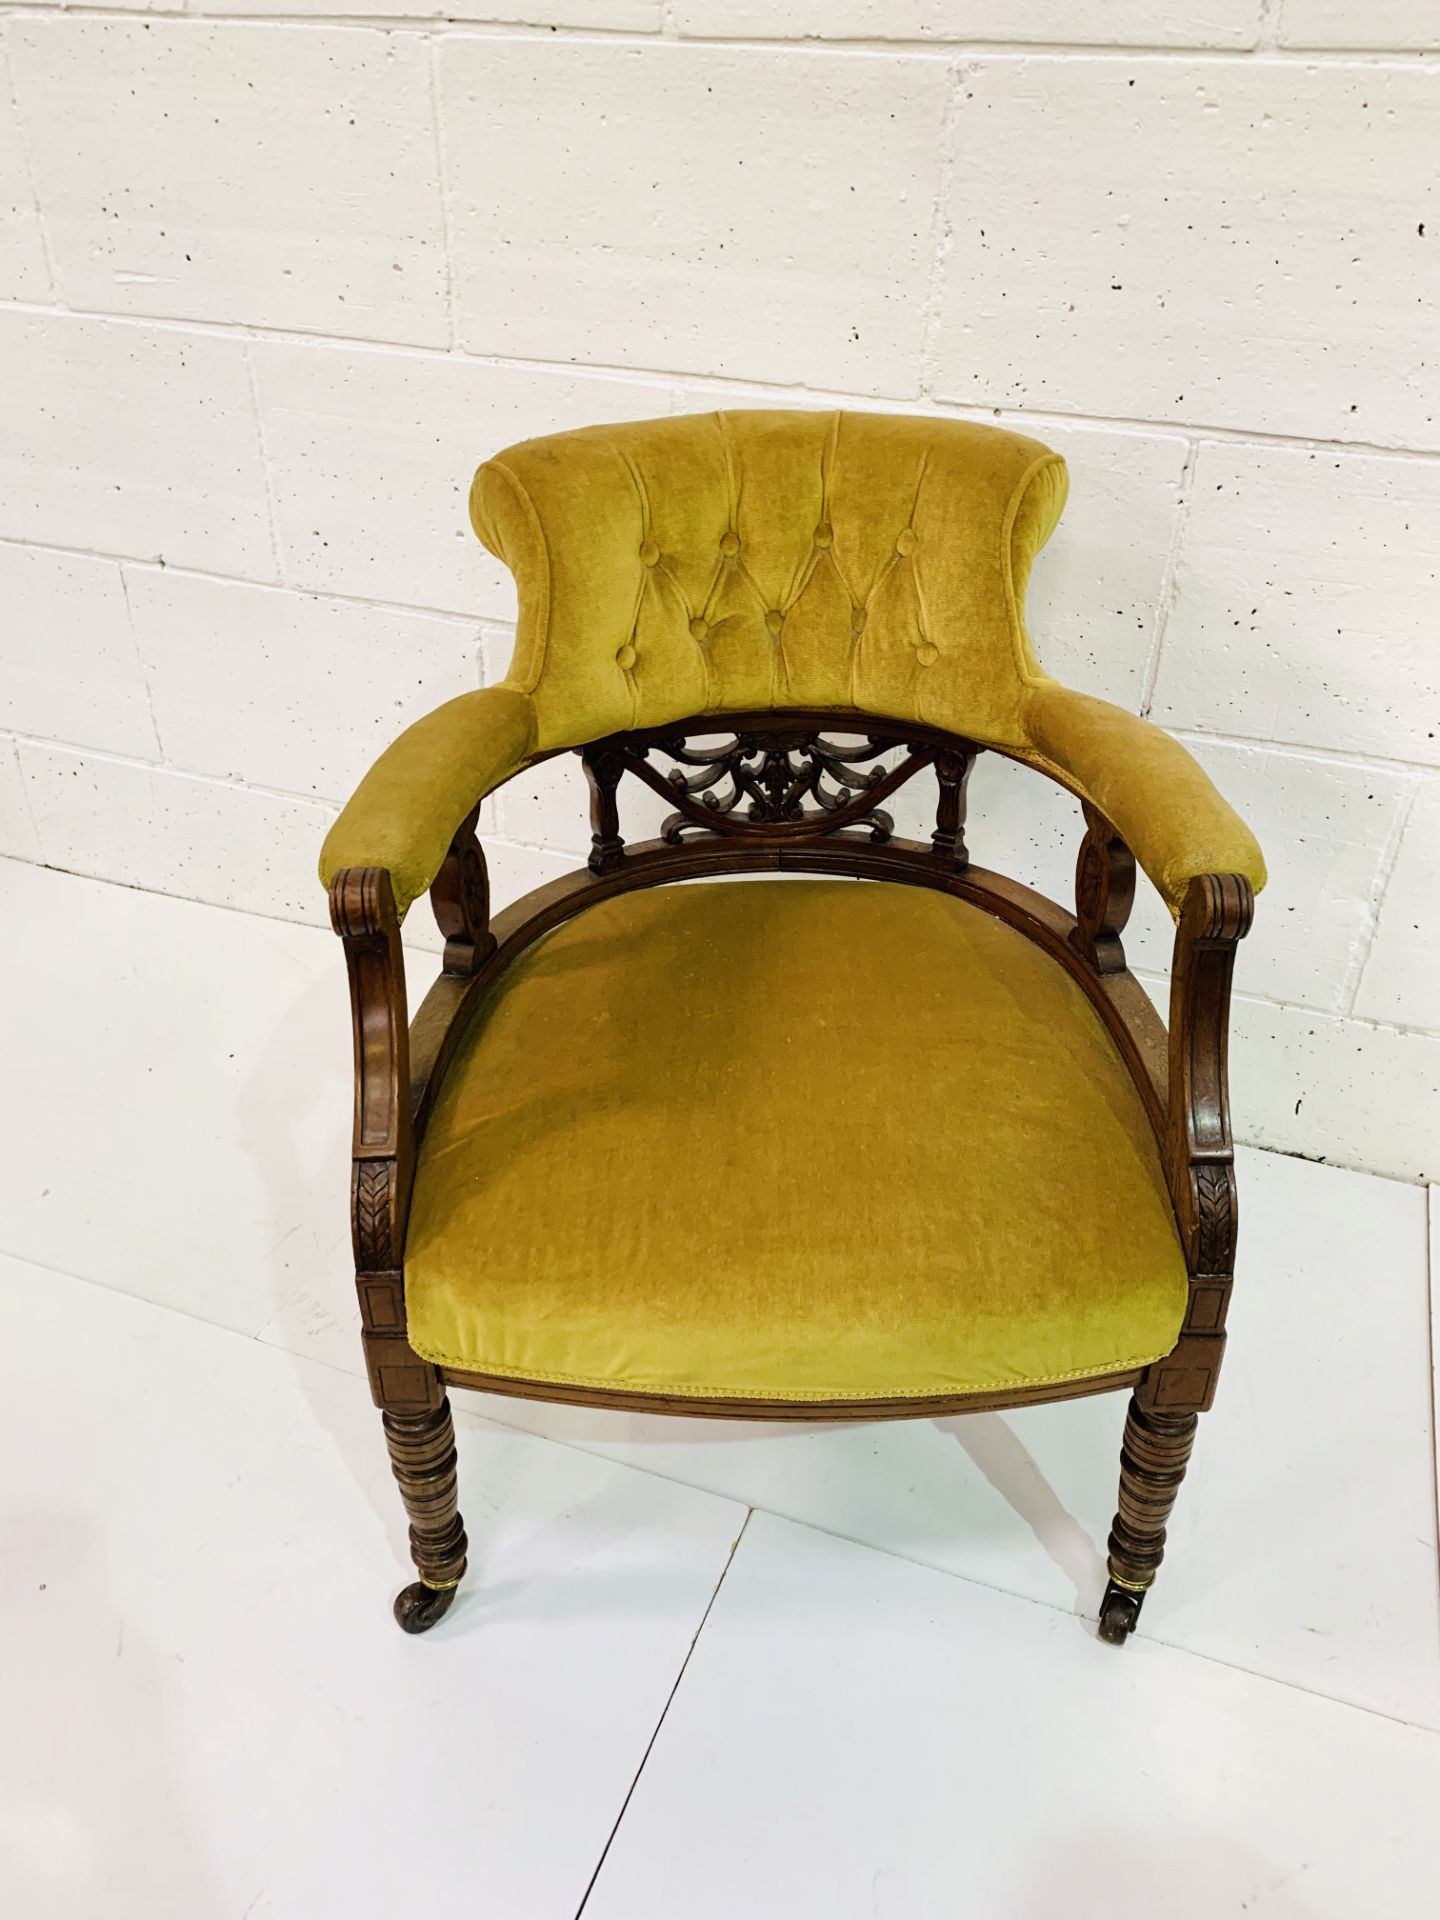 Mahogany yellow buttoned velvet upholstered open arm chair with decorative splat. - Image 2 of 6